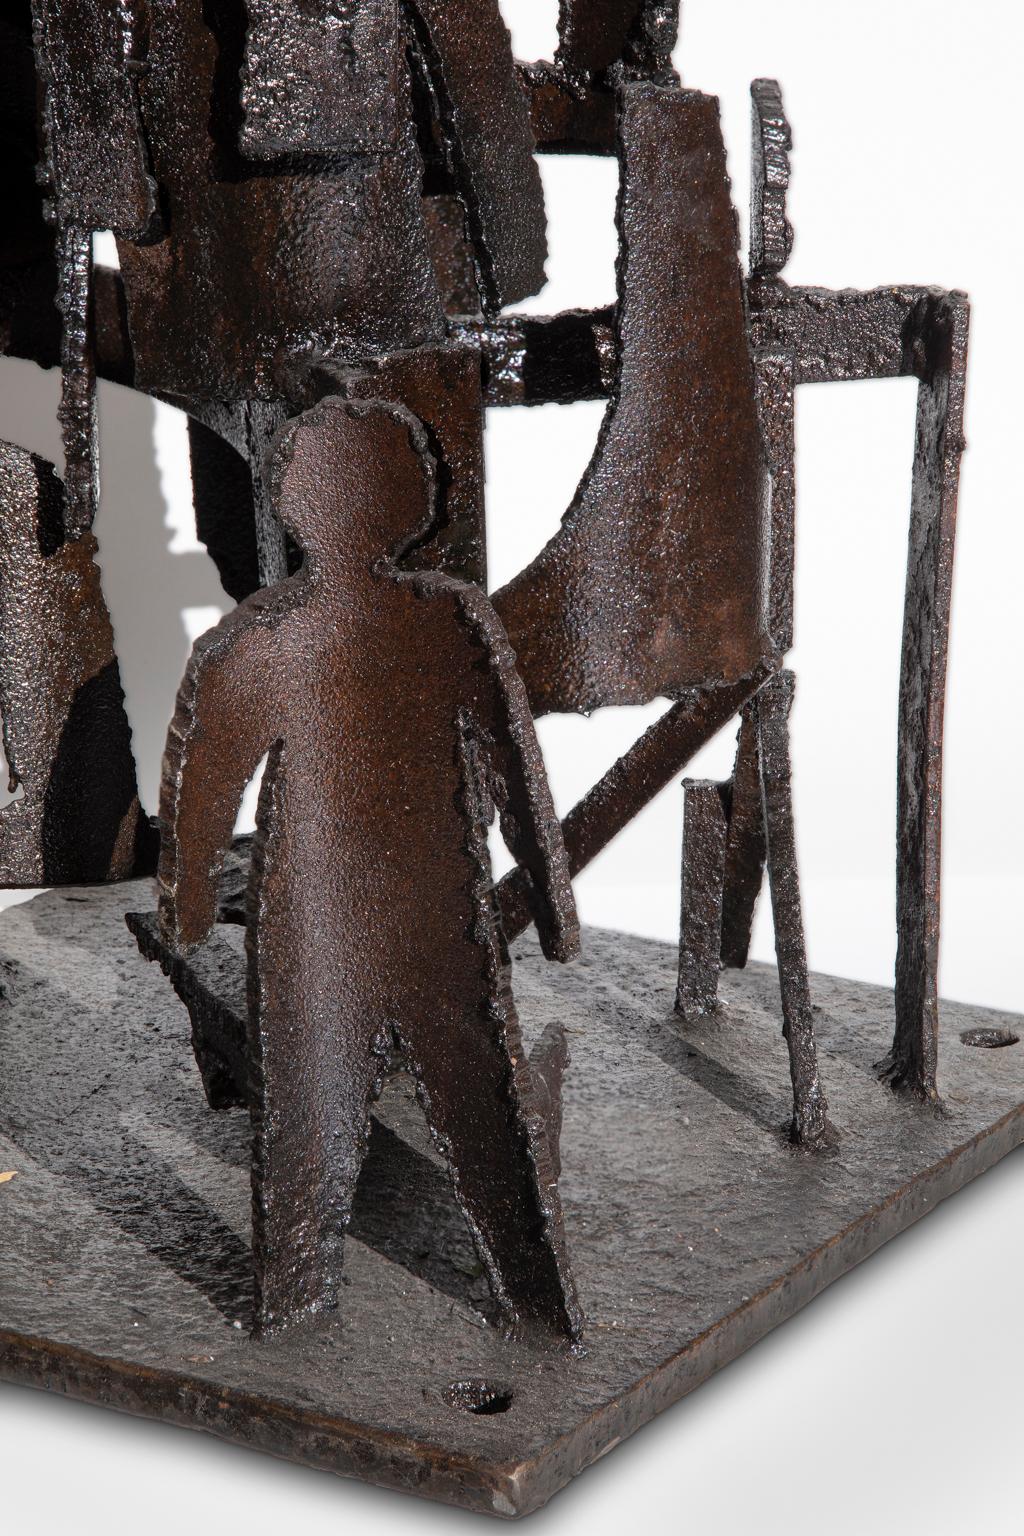 UNTITLED, Abstract/Figurative, Black Welded Steel, Cass Corridor Artist, Detroit - Abstract Expressionist Sculpture by Robert Sestok